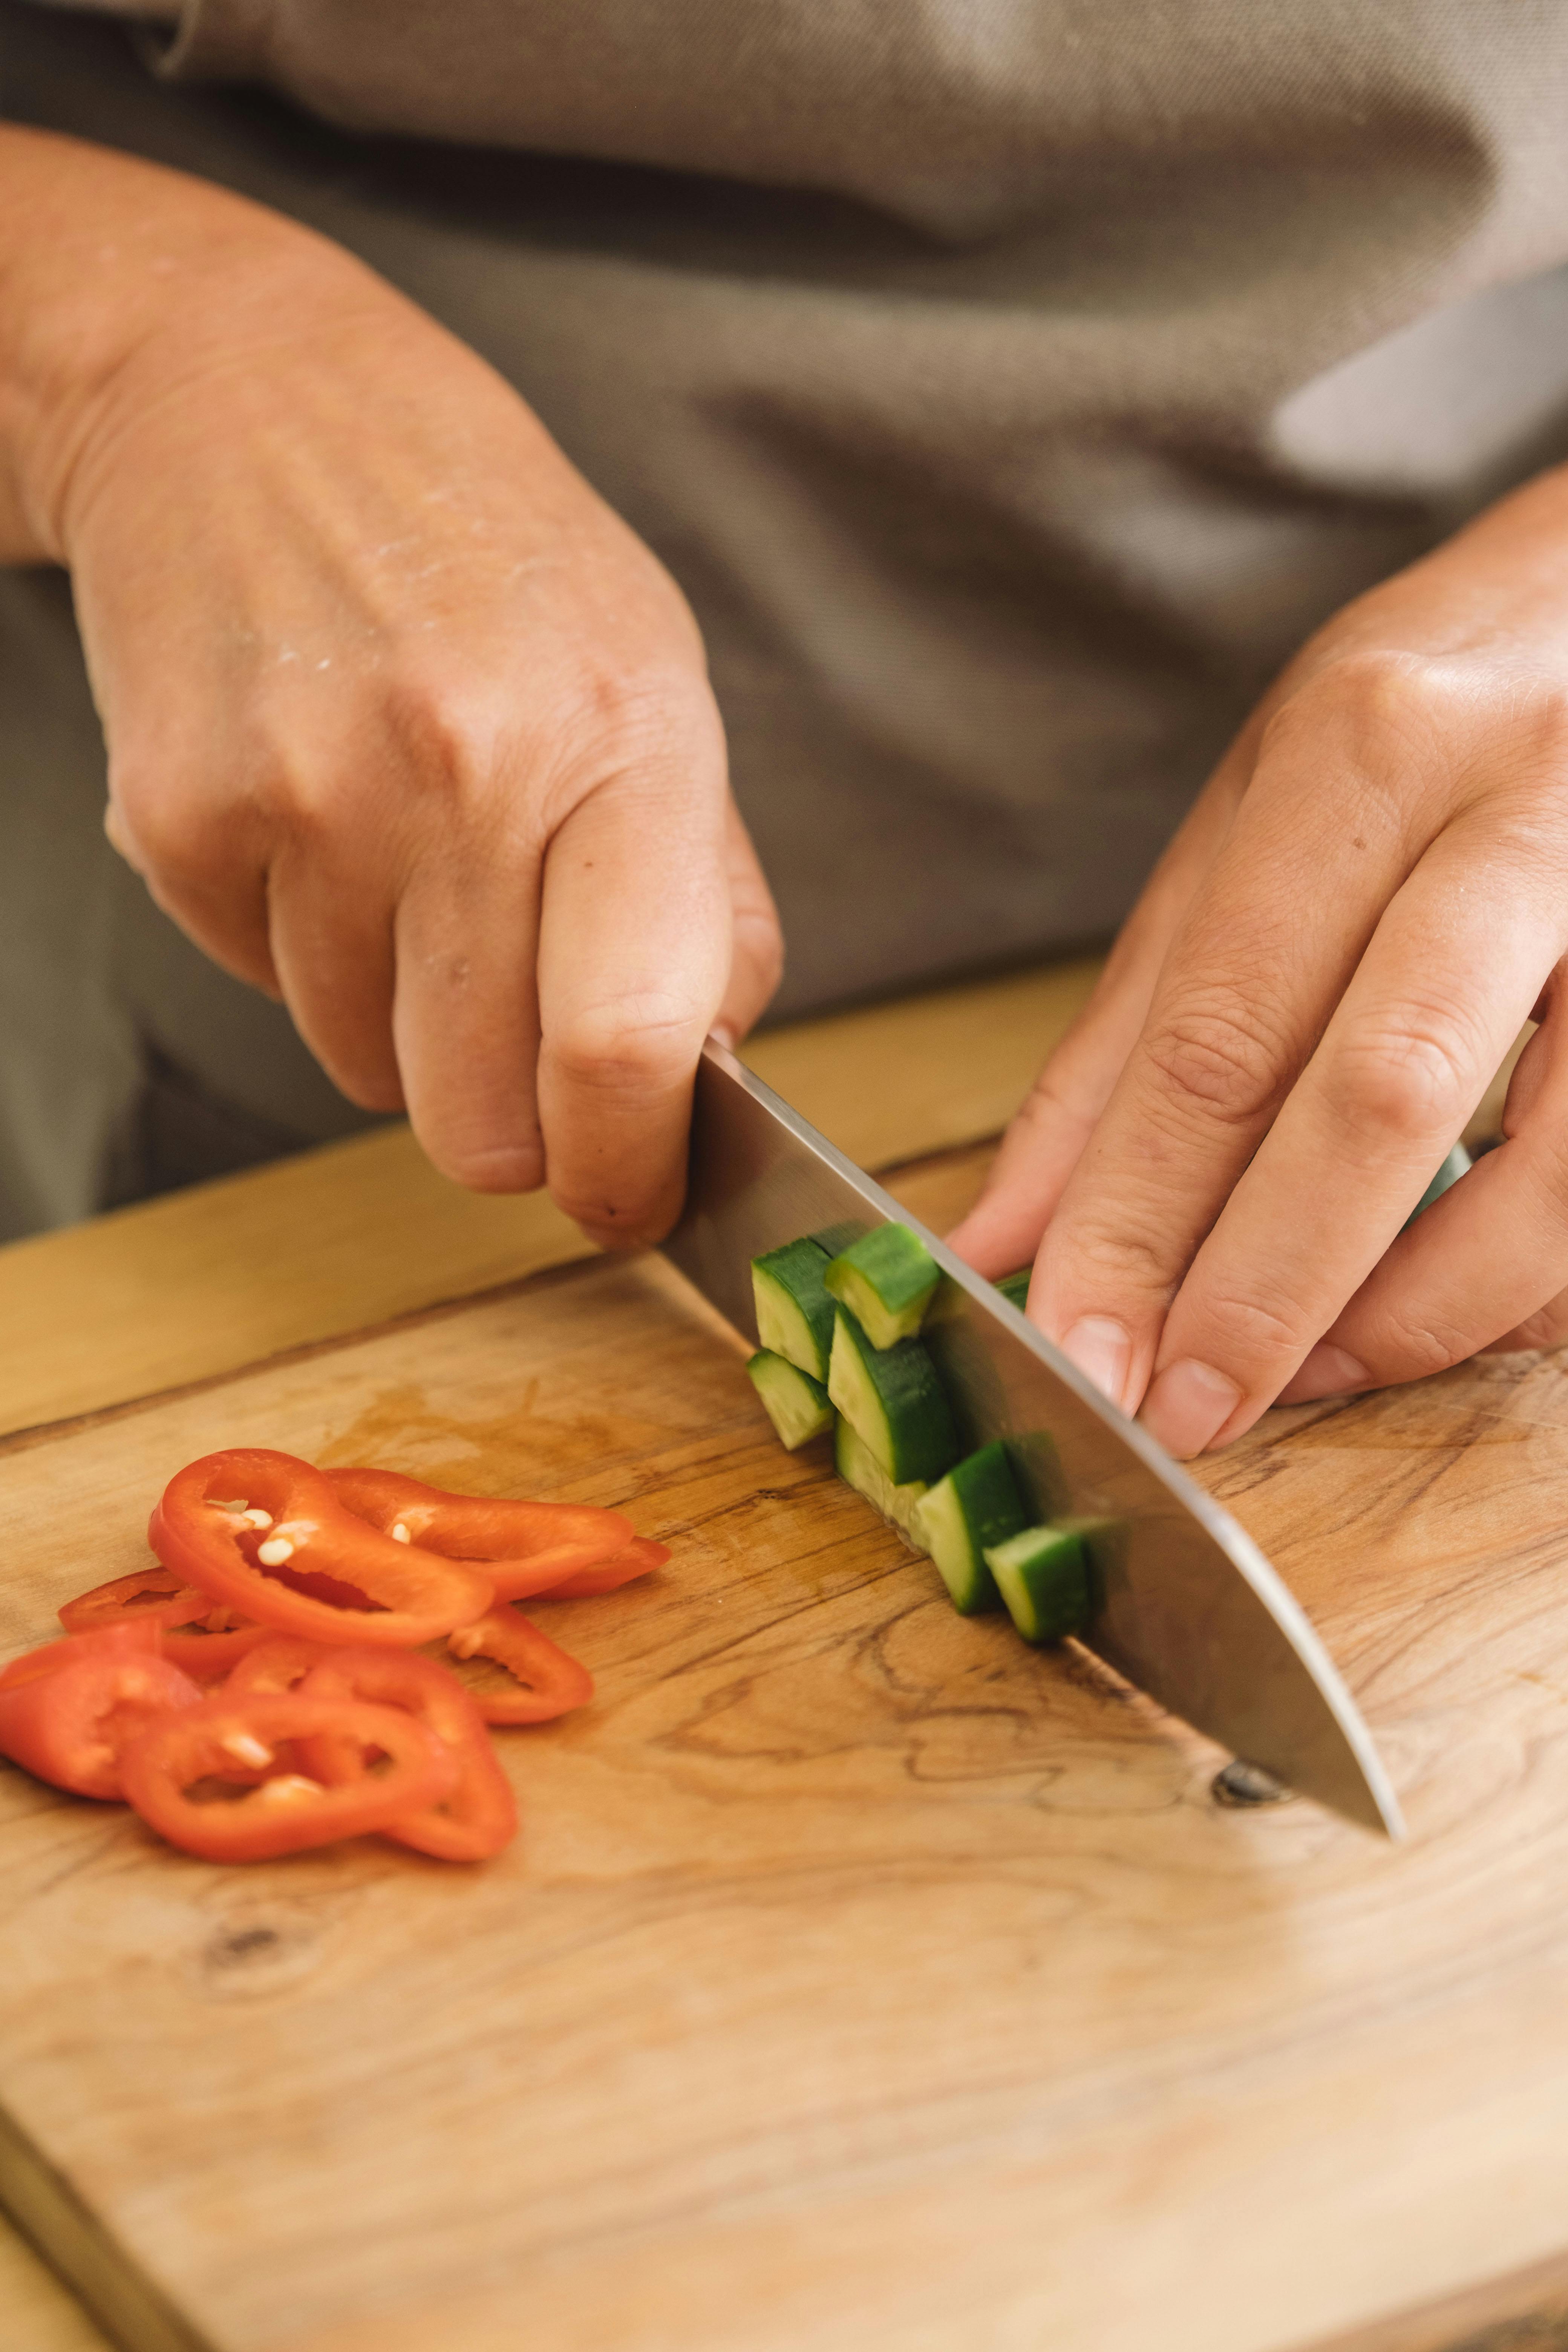 Close-Up Shot of a Knife and Sliced Vegetables on a Wooden Chopping Board ·  Free Stock Photo